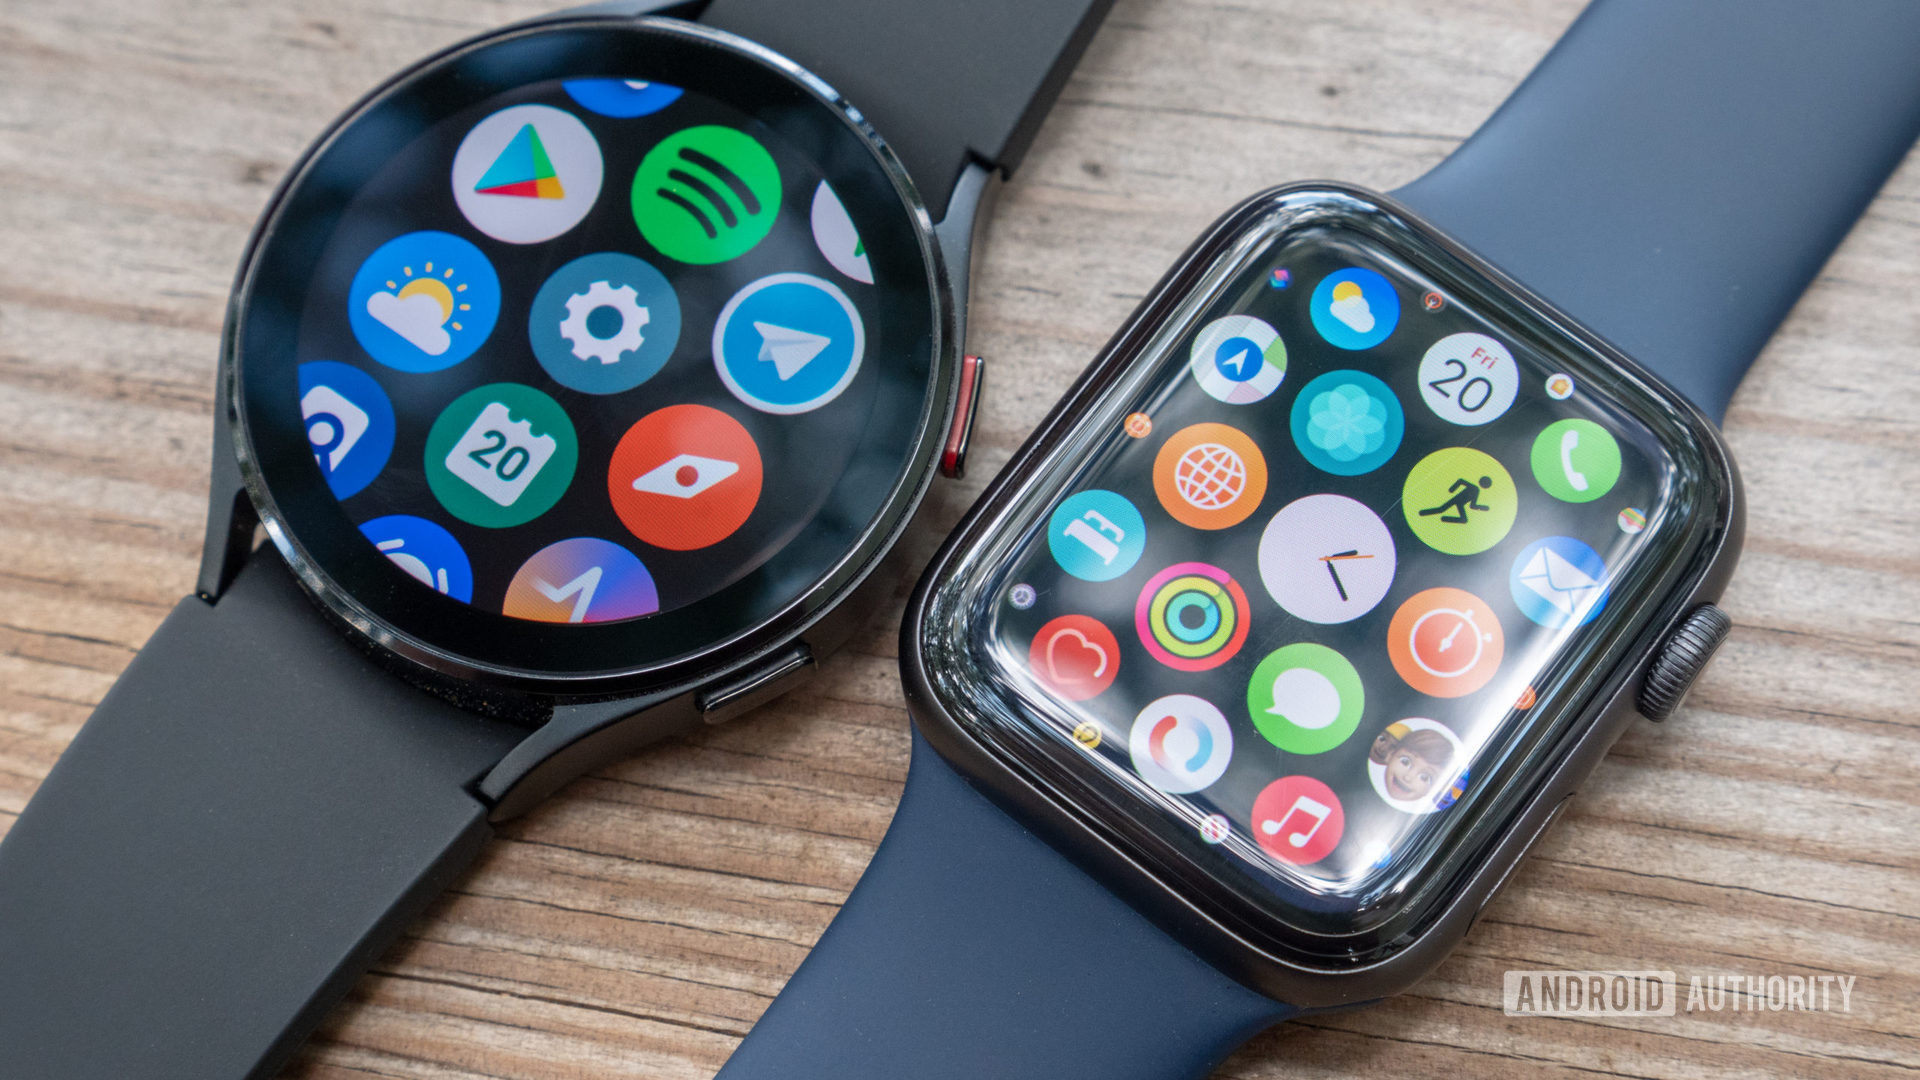 The Samsung Galaxy Watch 4 and Apple Watch Series 6 lie on a table with the page with all apps on it.